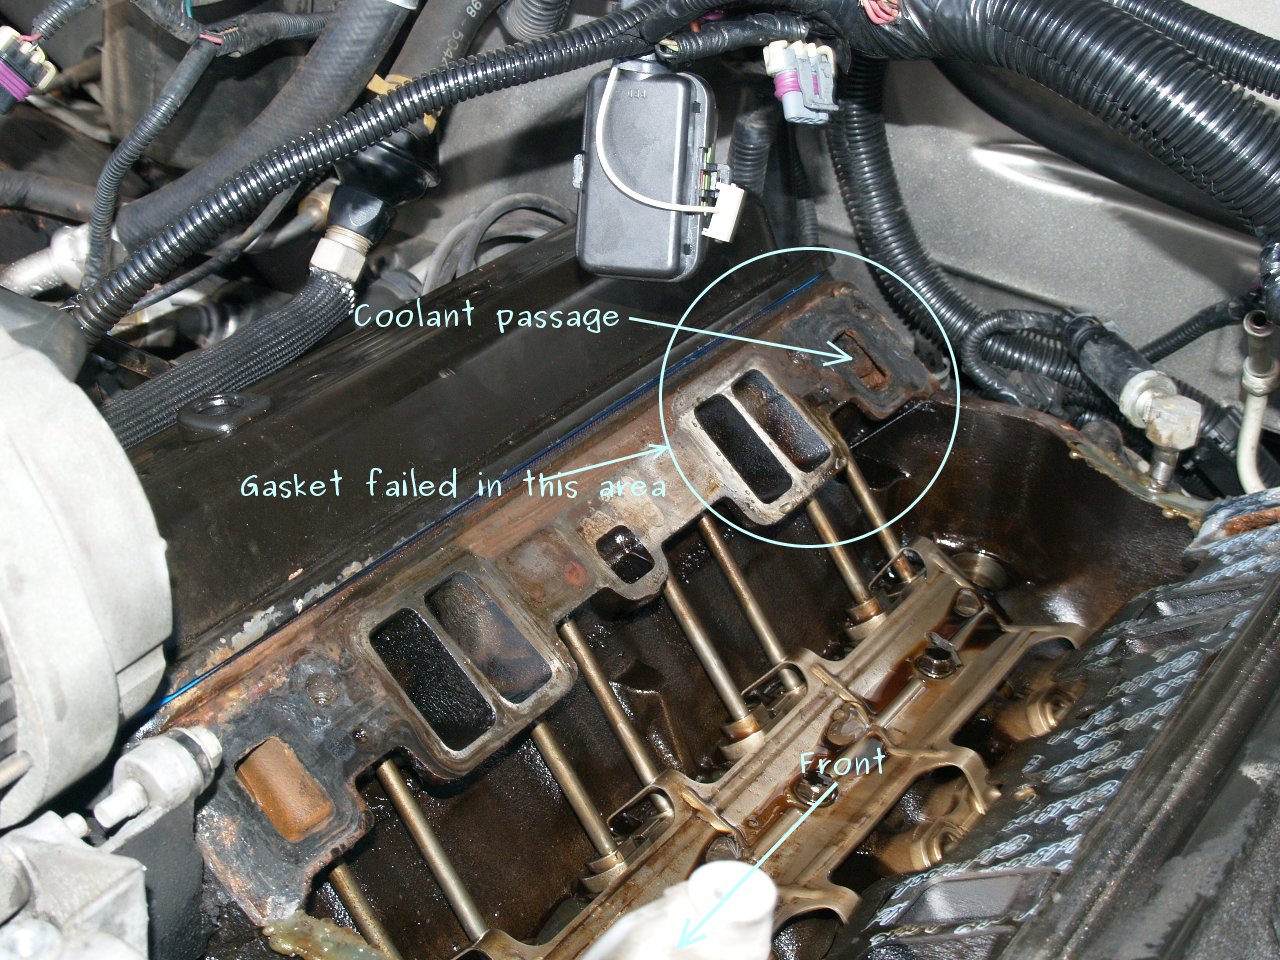 See P0271 in engine